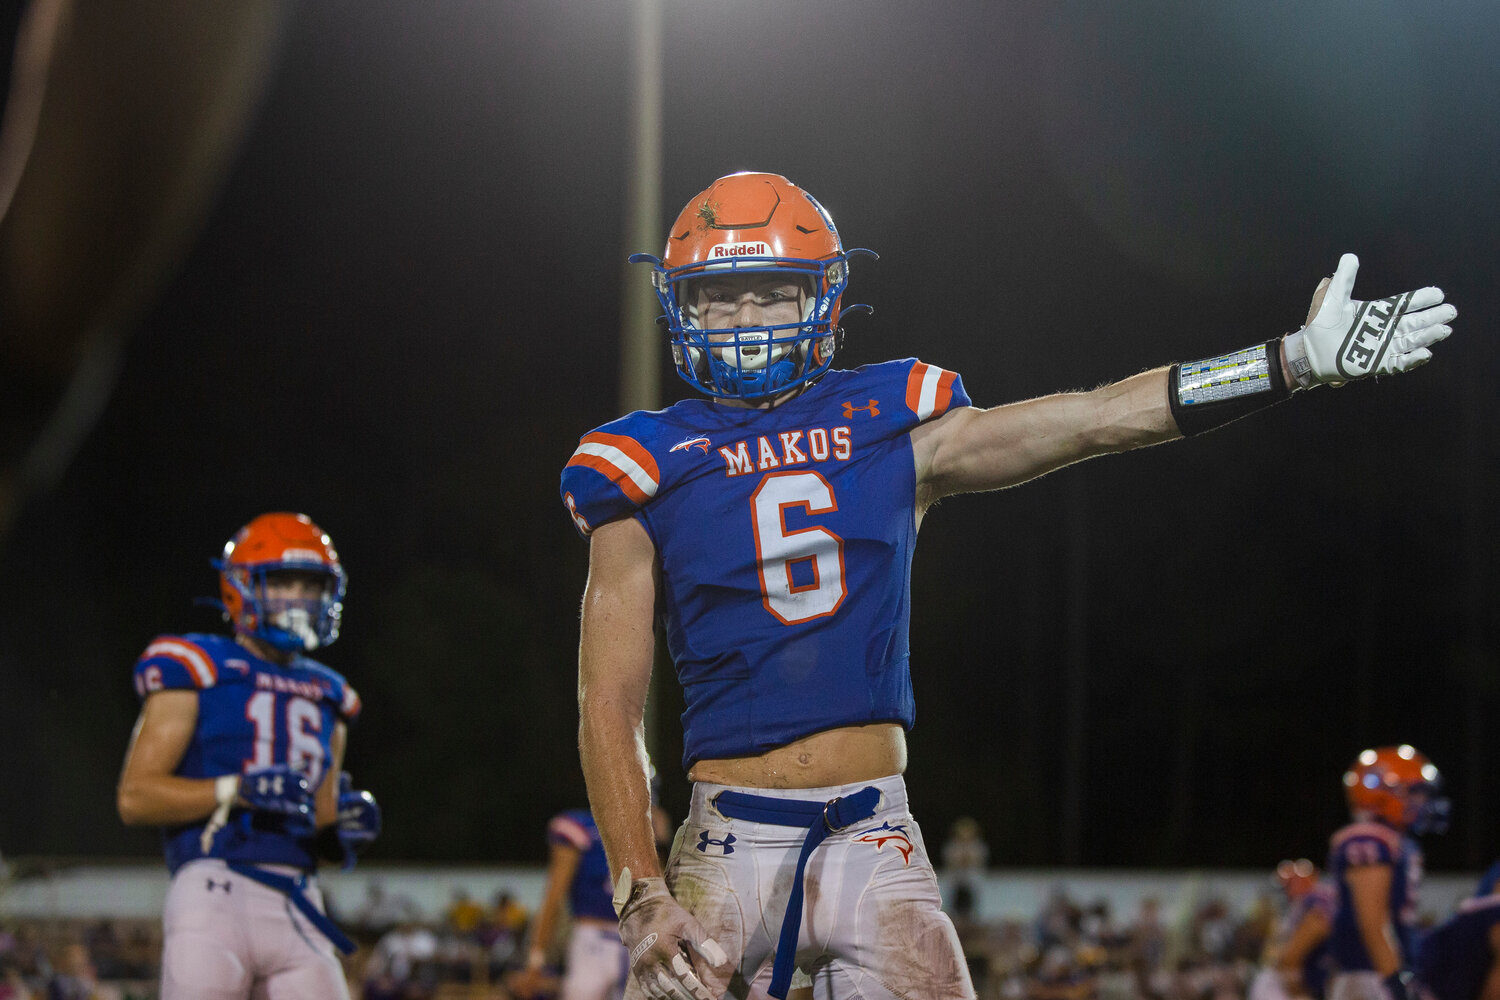 Will Reddell celebrates a big play for the Orange Beach Makos during their first Class 4A Region 1 contest of the year on Sept. 2, 2022, at home.